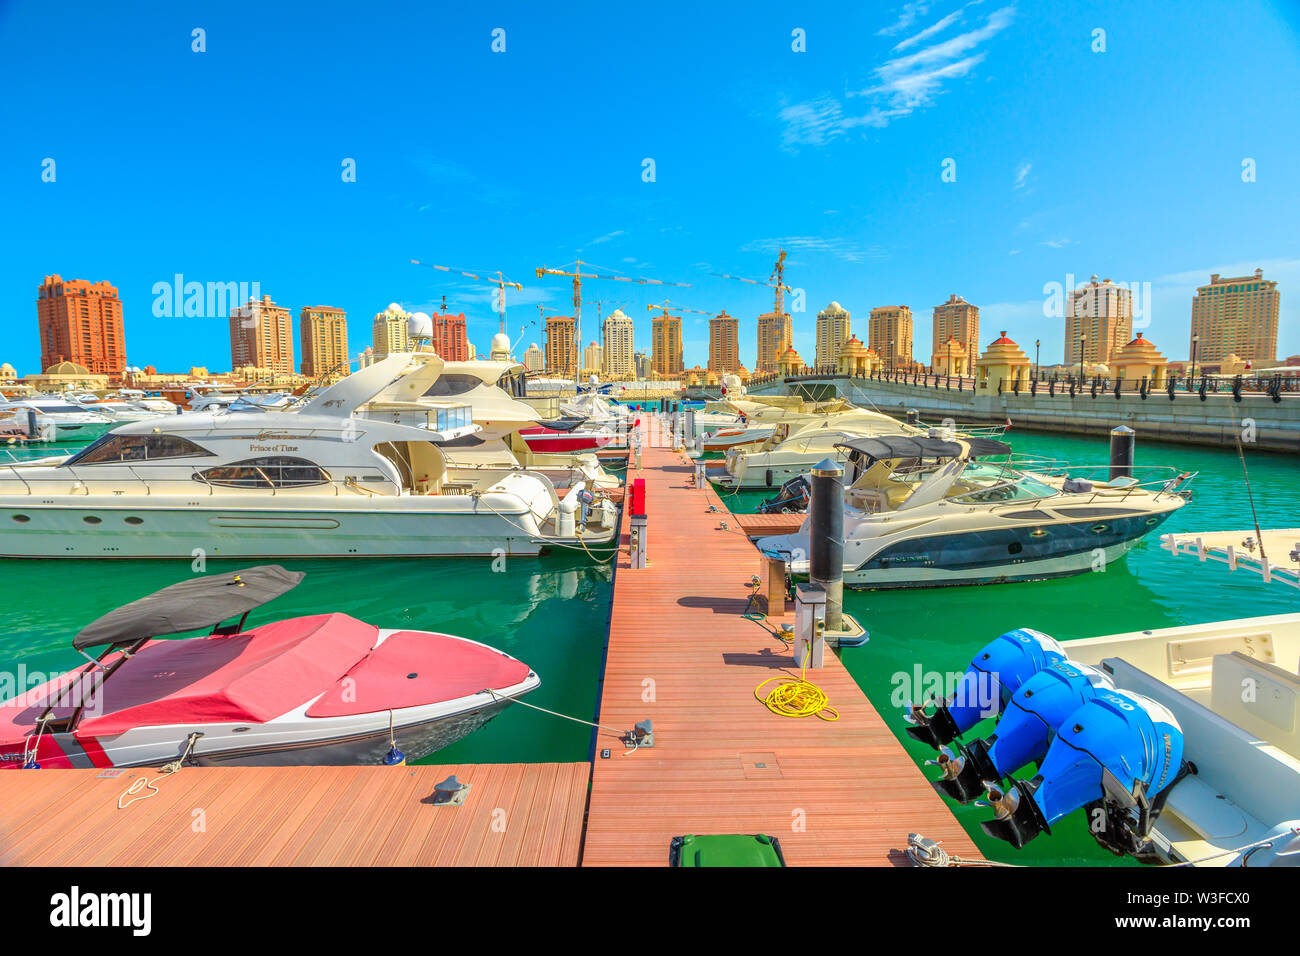 Doha, Qatar - February 18, 2019: Marina corniche promenade with luxury boats and yachts in Porto Arabia at the Pearl-Qatar. Residential towers on Stock Photo